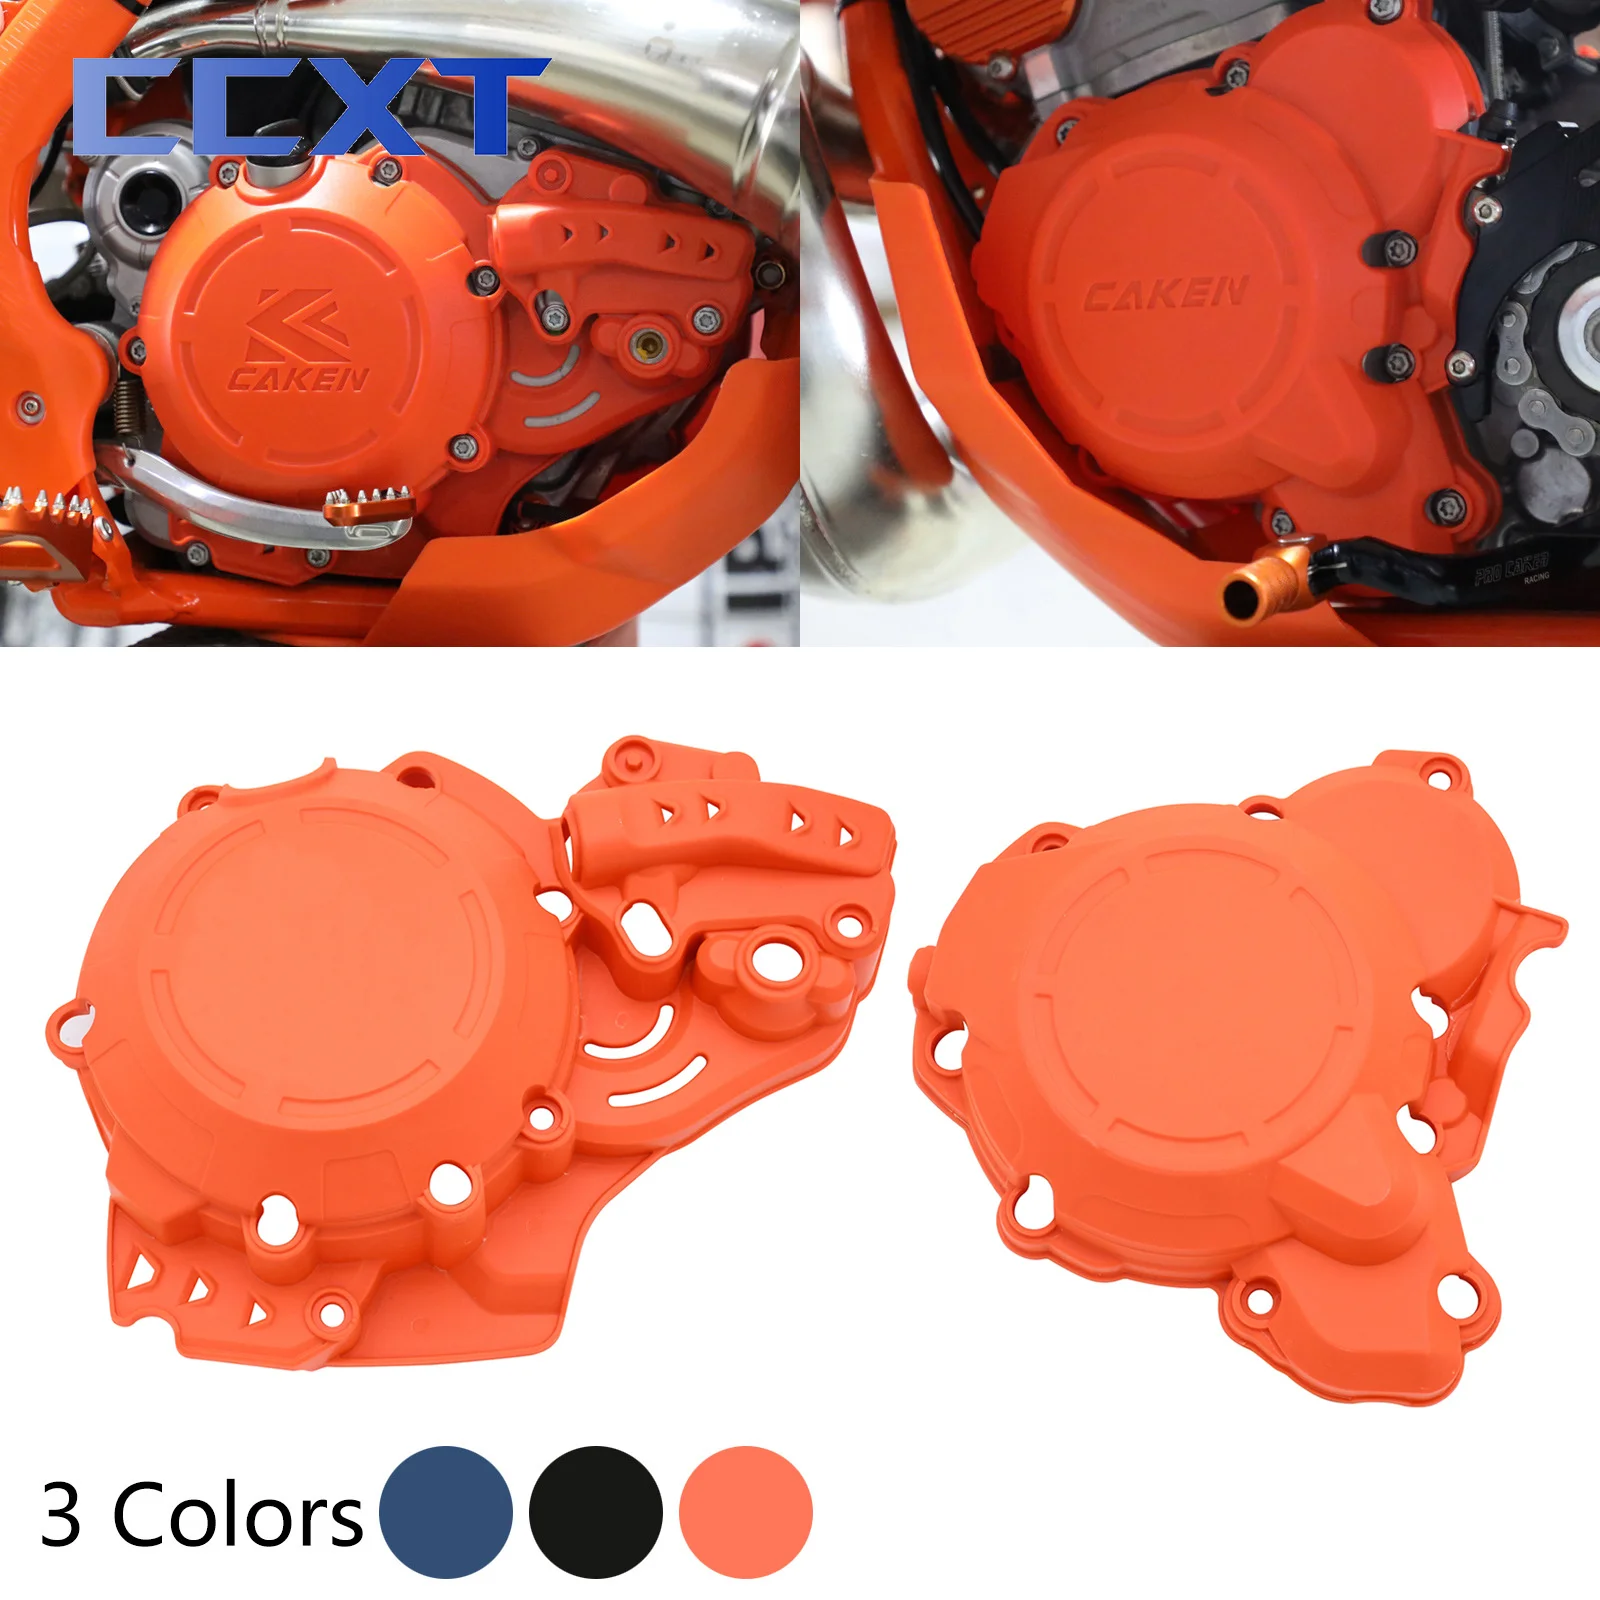 

Motorcycle Clutch Cover Ignition Protector Guard For KTM EXC250 EXC300 SX250 XC250 XC300 XCW250 XCW300 TPI 2019 2020 2021 2022